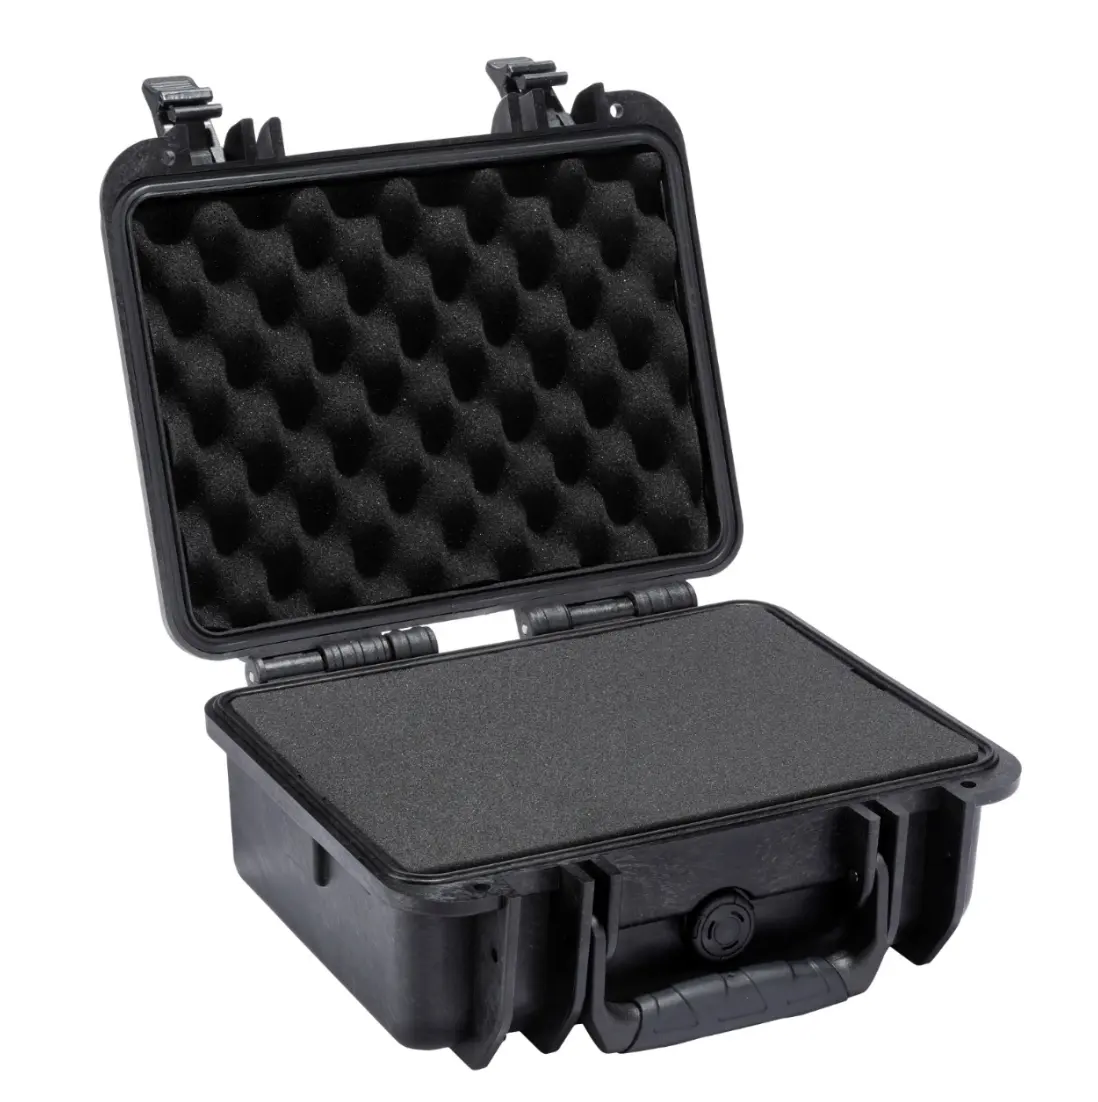 ABS Universal Waterproof Case Suitcase Plastic Hard Case Tool Box With Wheels